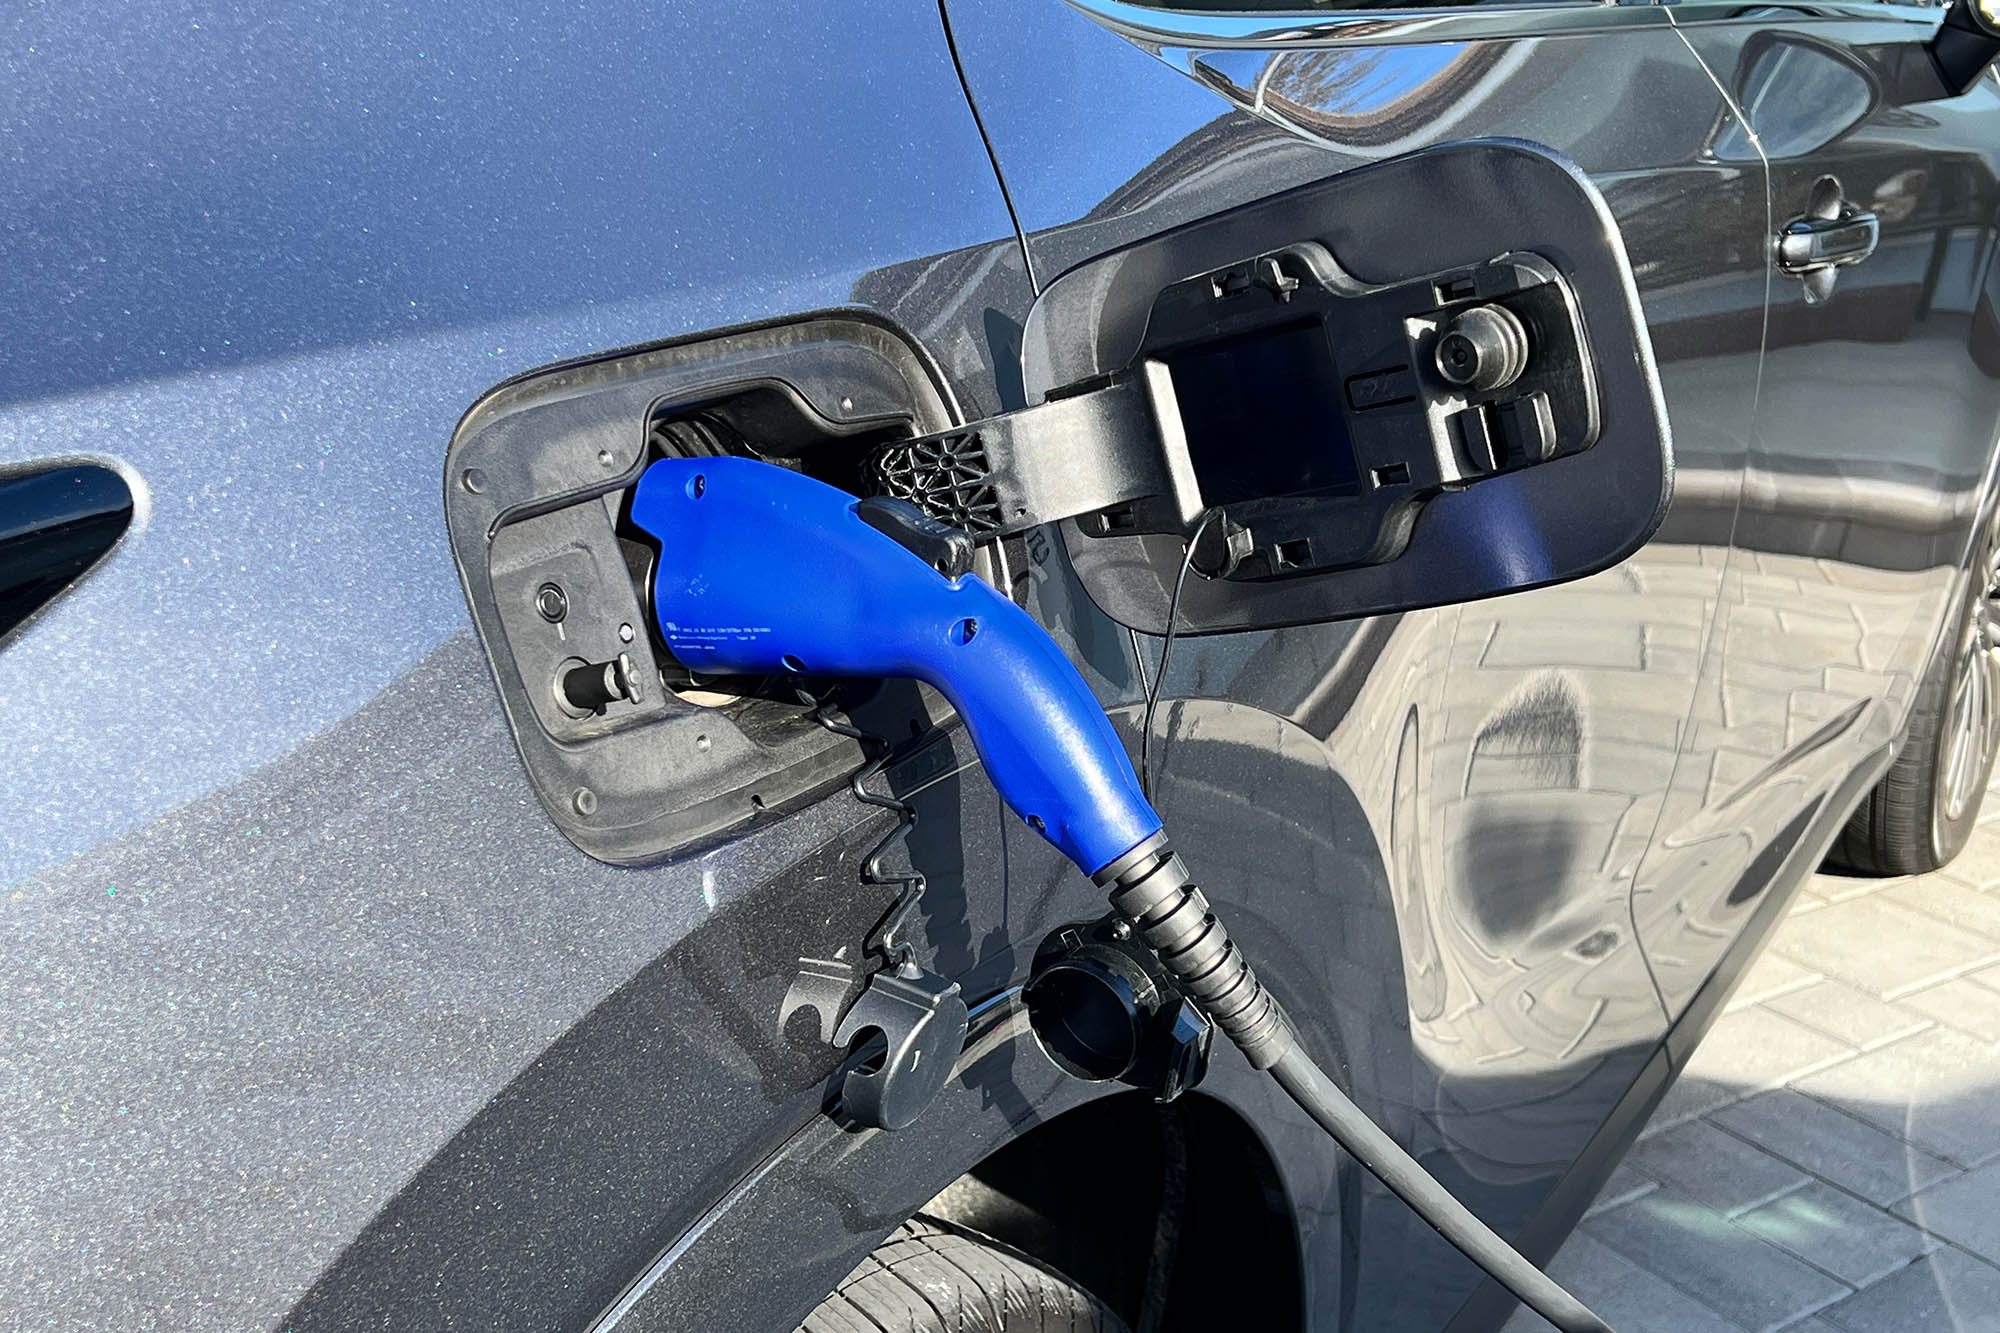 View of a Lexus RX 450h+ plug-in hybrid's power port as it recharges.